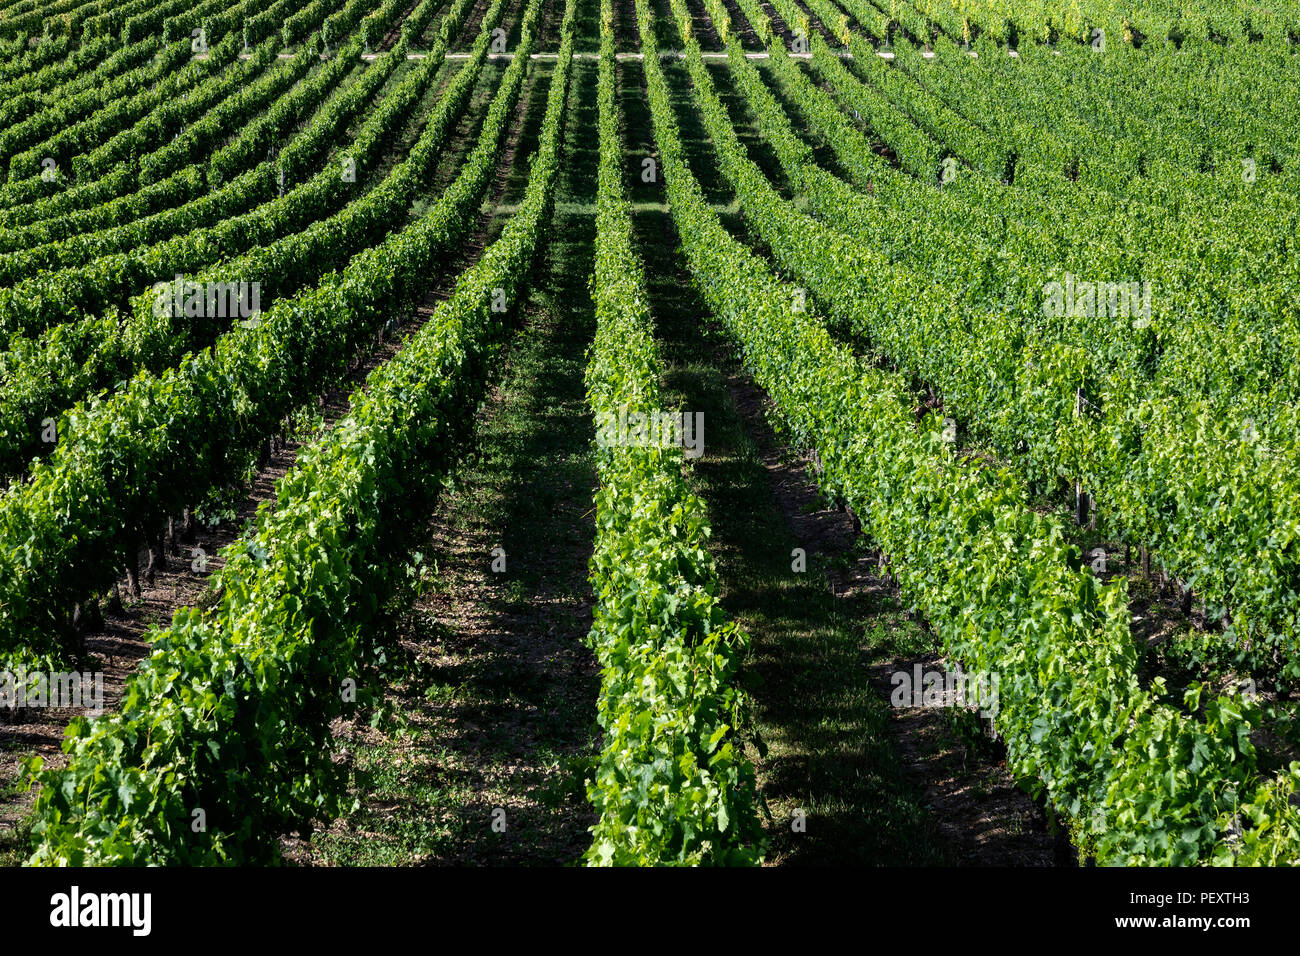 Wine Production - Rows of vines in a vineyard in the Dordogne region of France Stock Photo